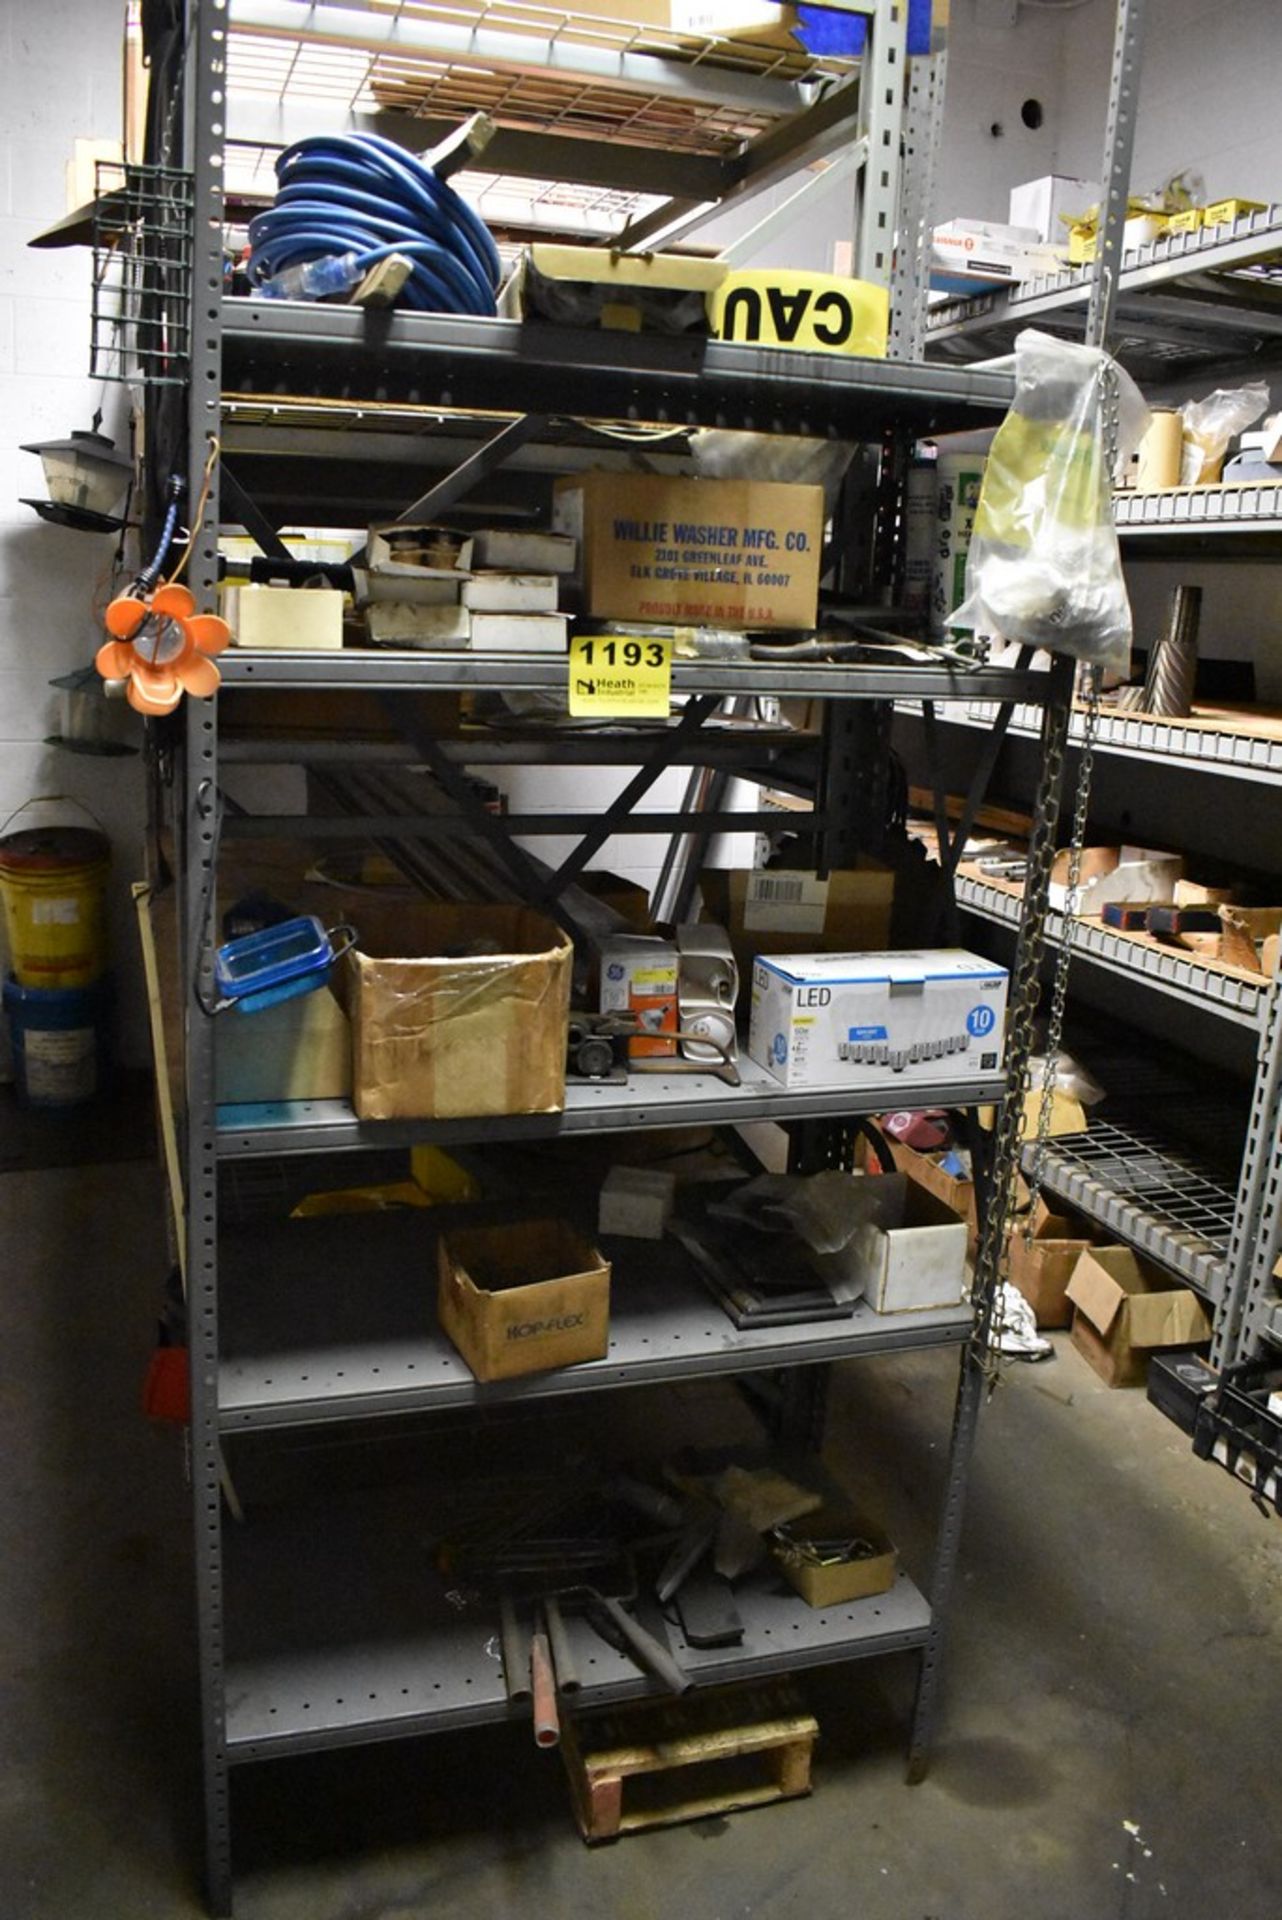 ADJUSTABLE SHELVING UNIT WITH CONTENTS, 36" X 14" X 84"